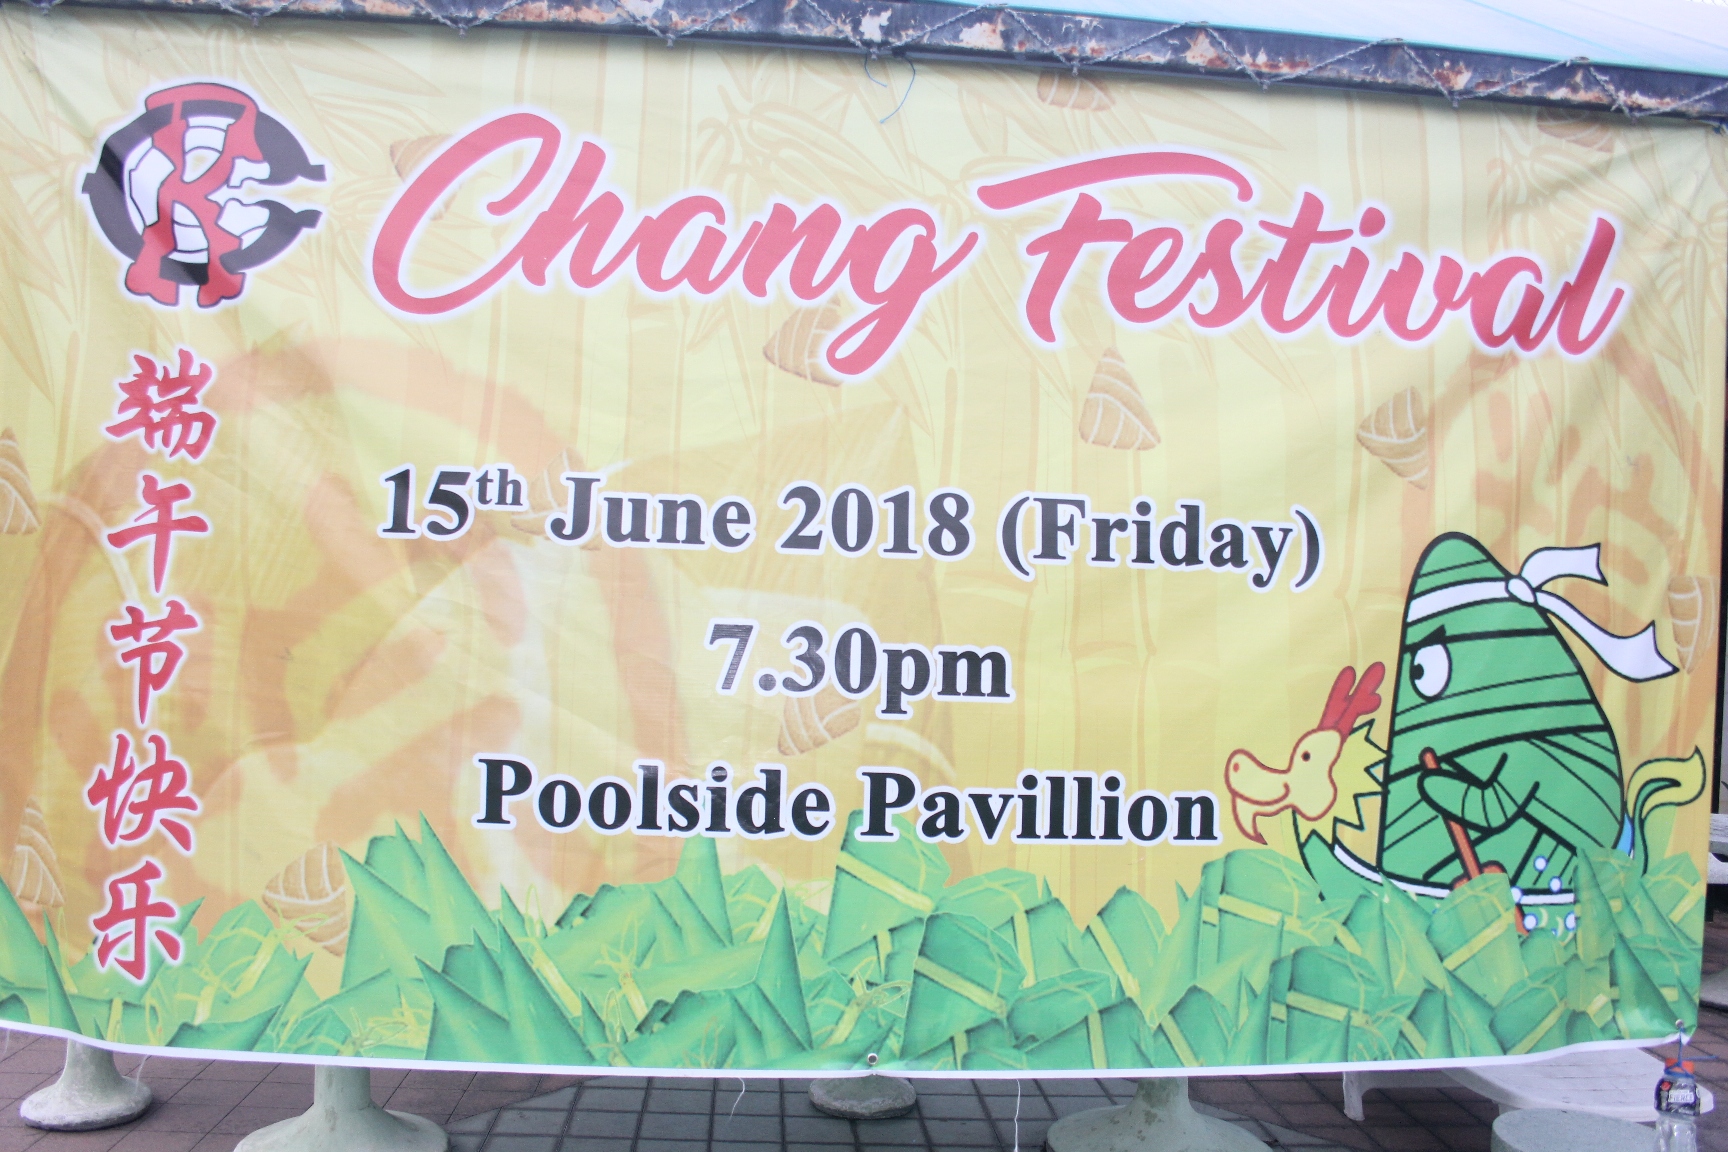 2018 Chang Festival Chinese Recreational Club